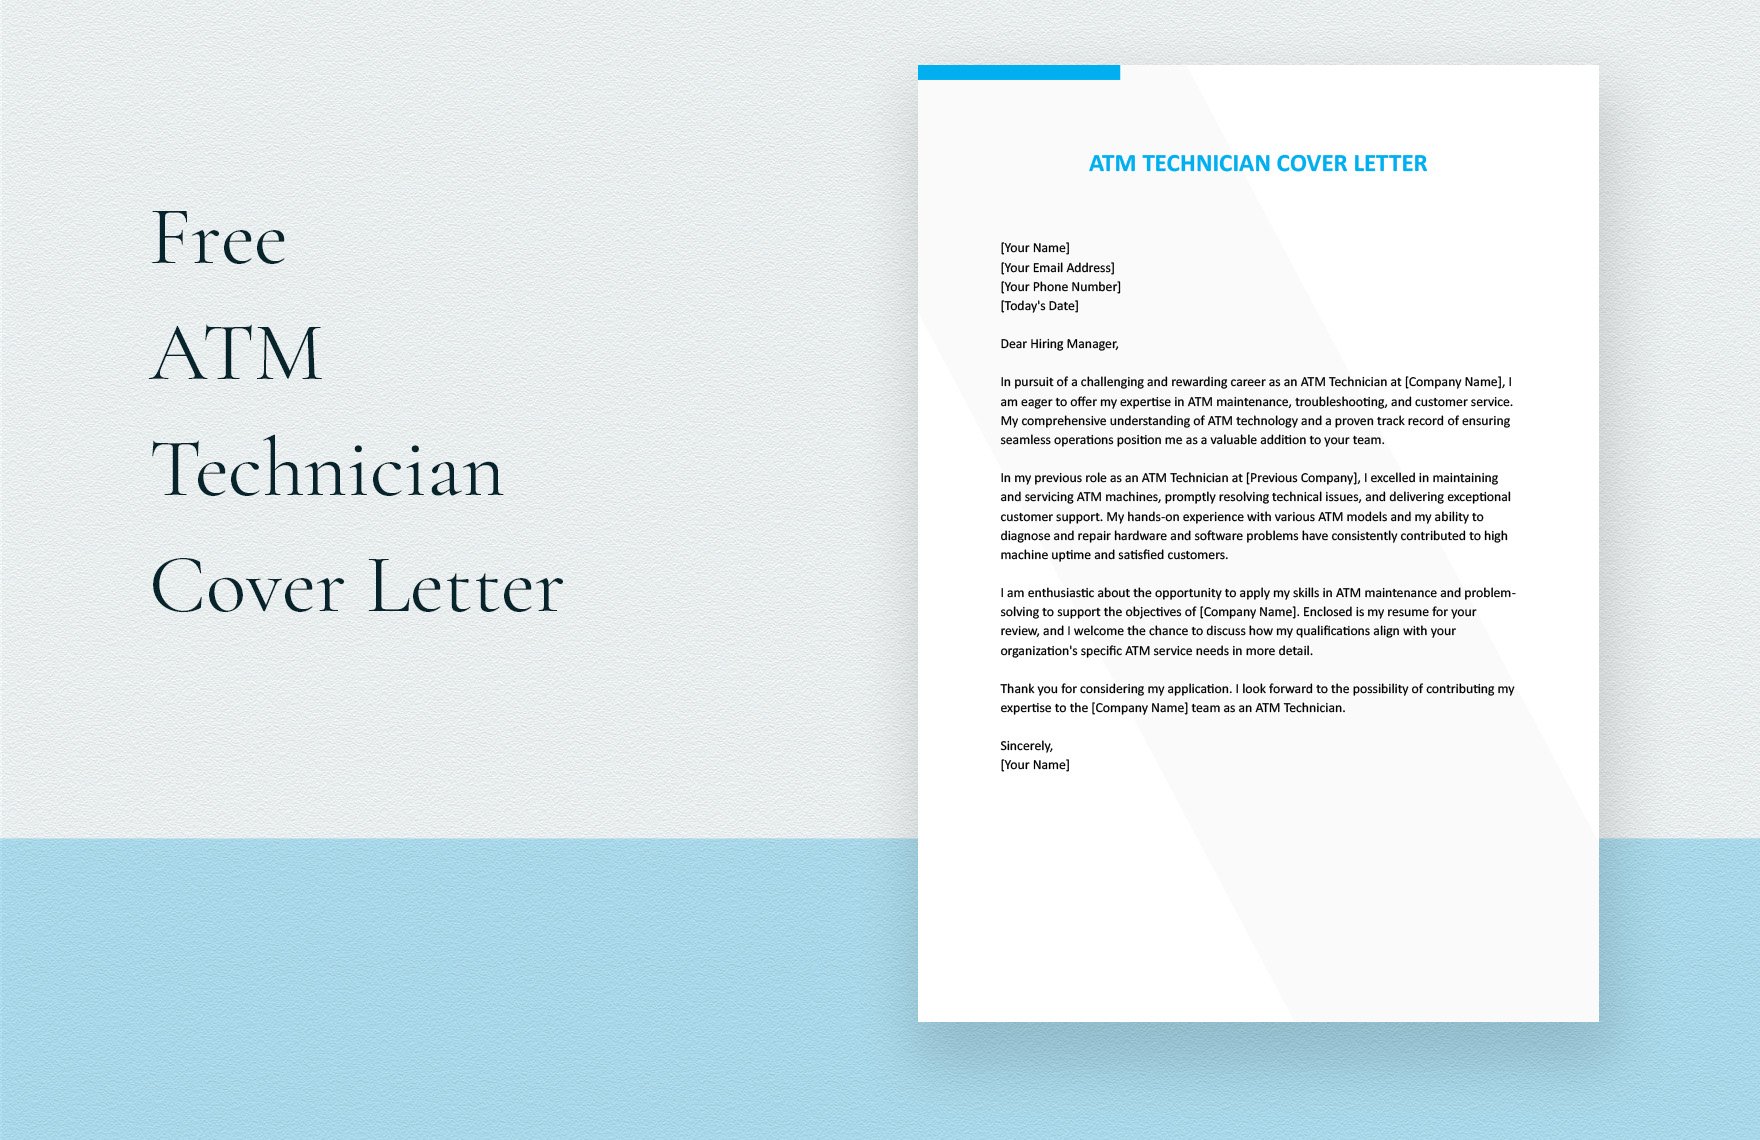 ATM Technician Cover Letter in Word, Google Docs